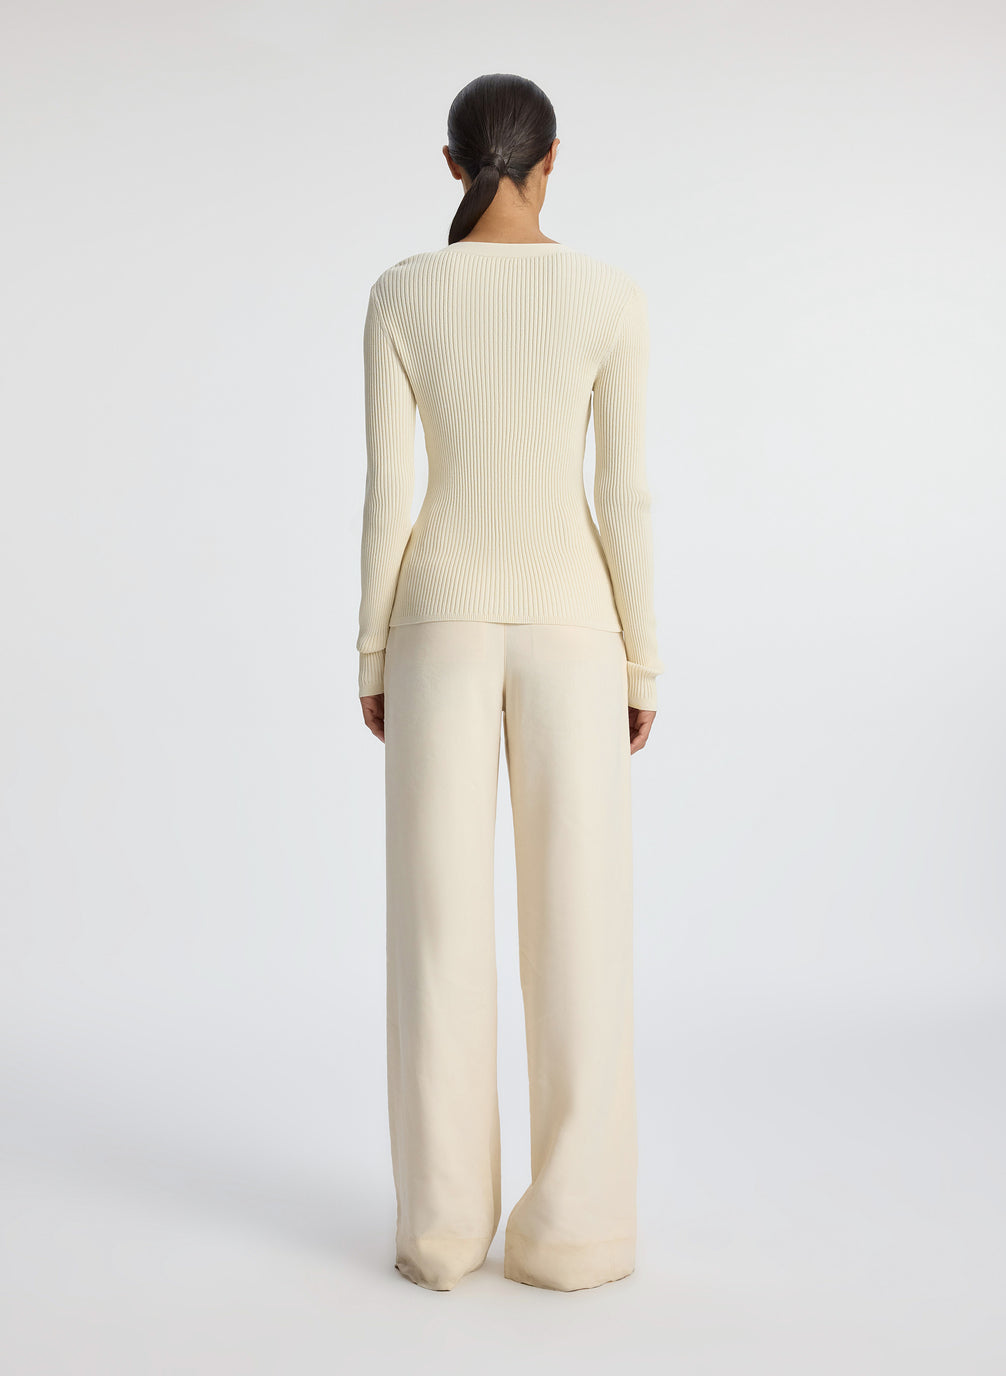 back view of woman wearing cream cardigan and beige pants